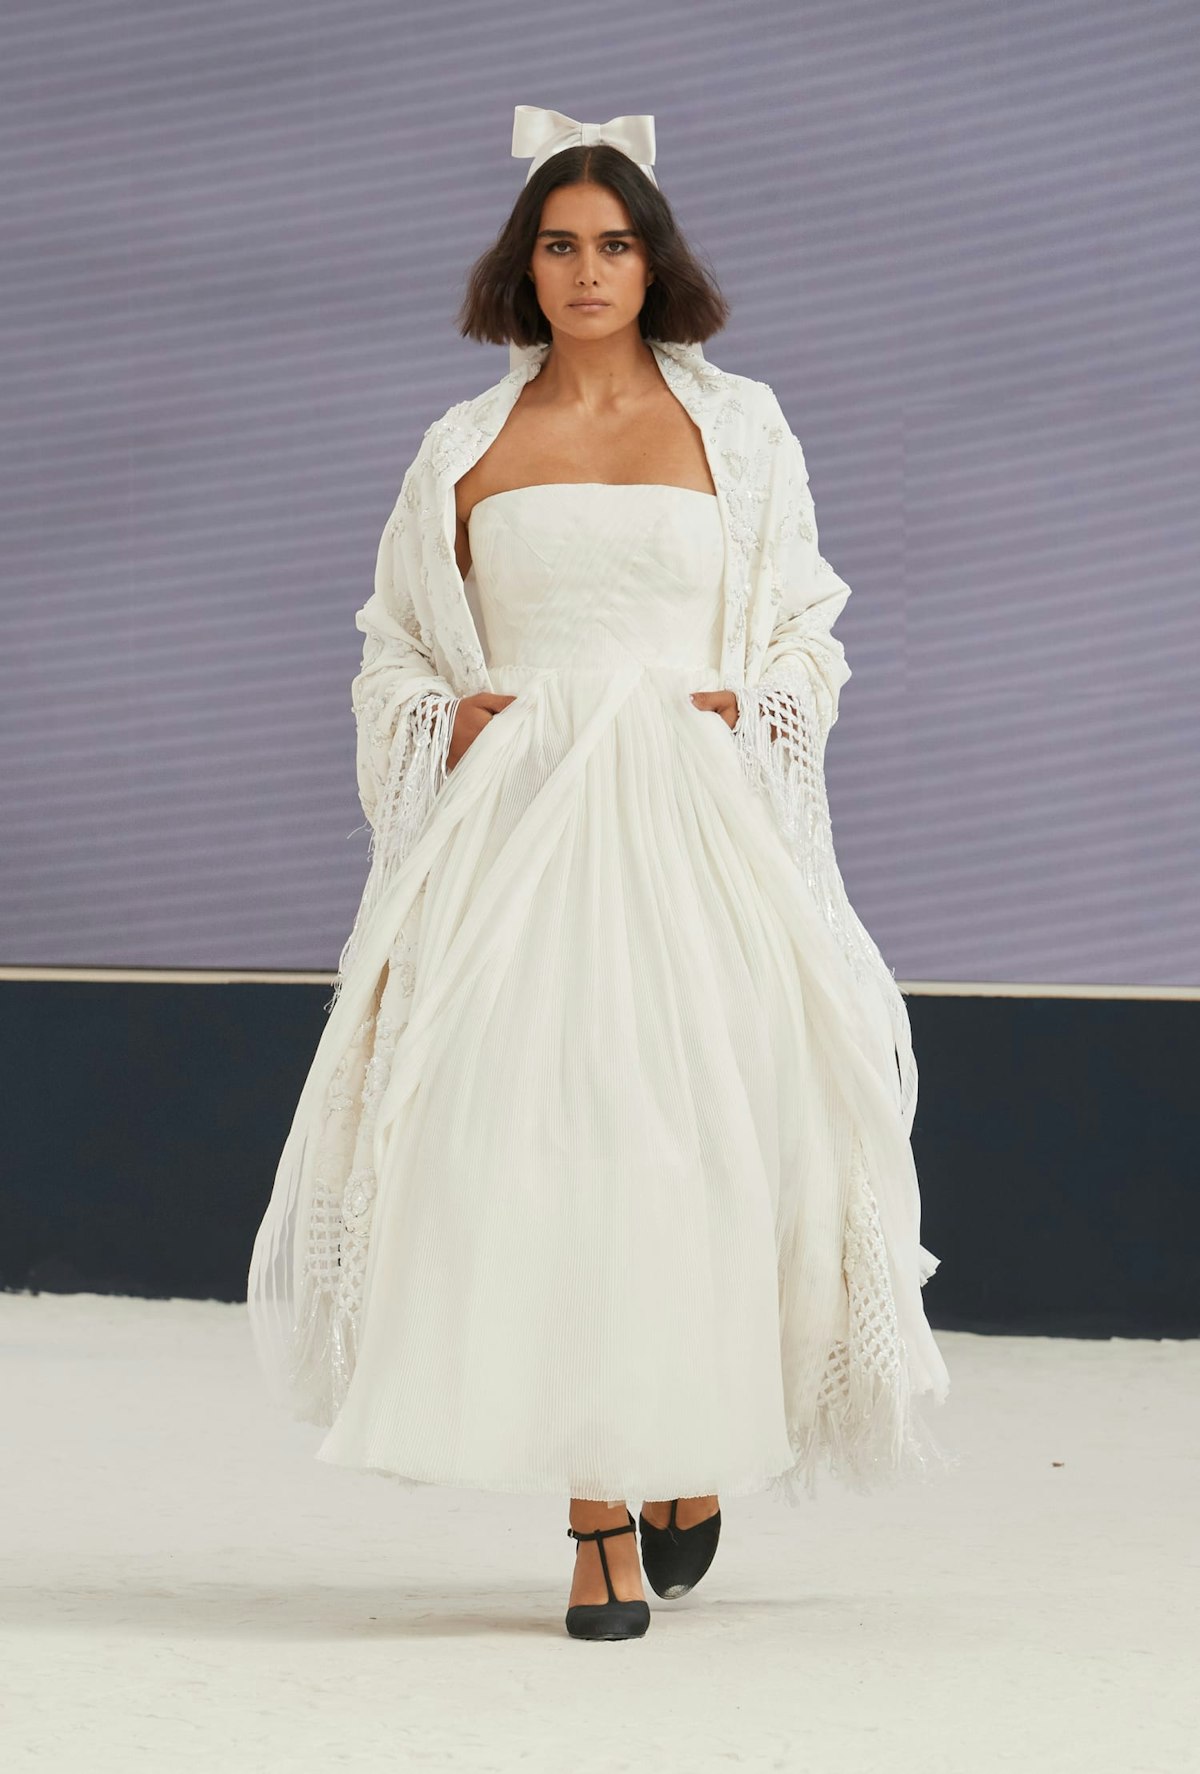 Chanel's Brides Throughout History, From Margaret Qualley to Linda